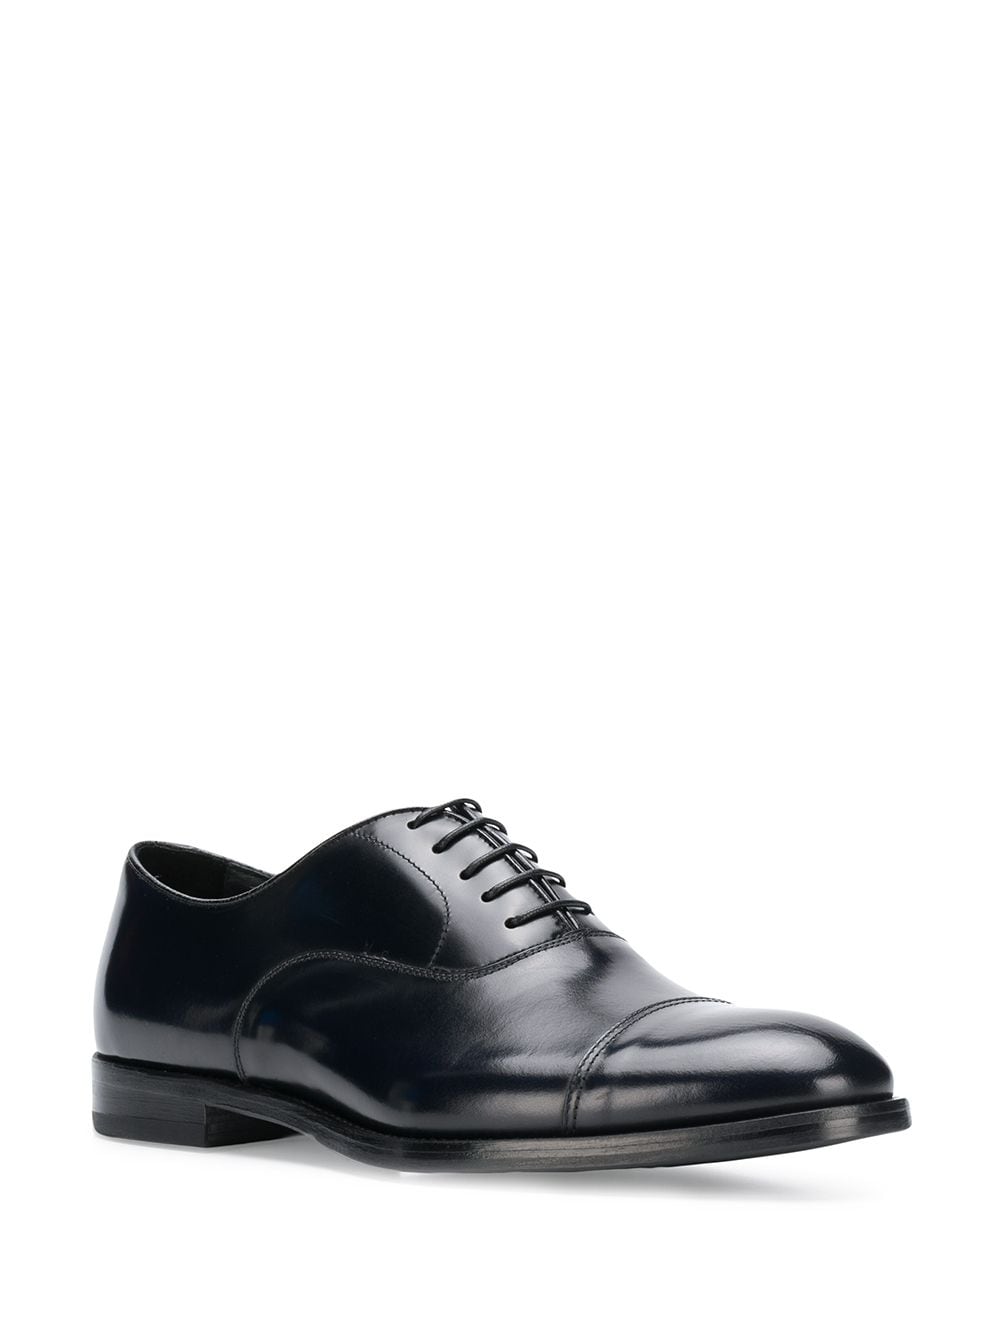 Image 2 of Doucal's lace-up Oxford shoes